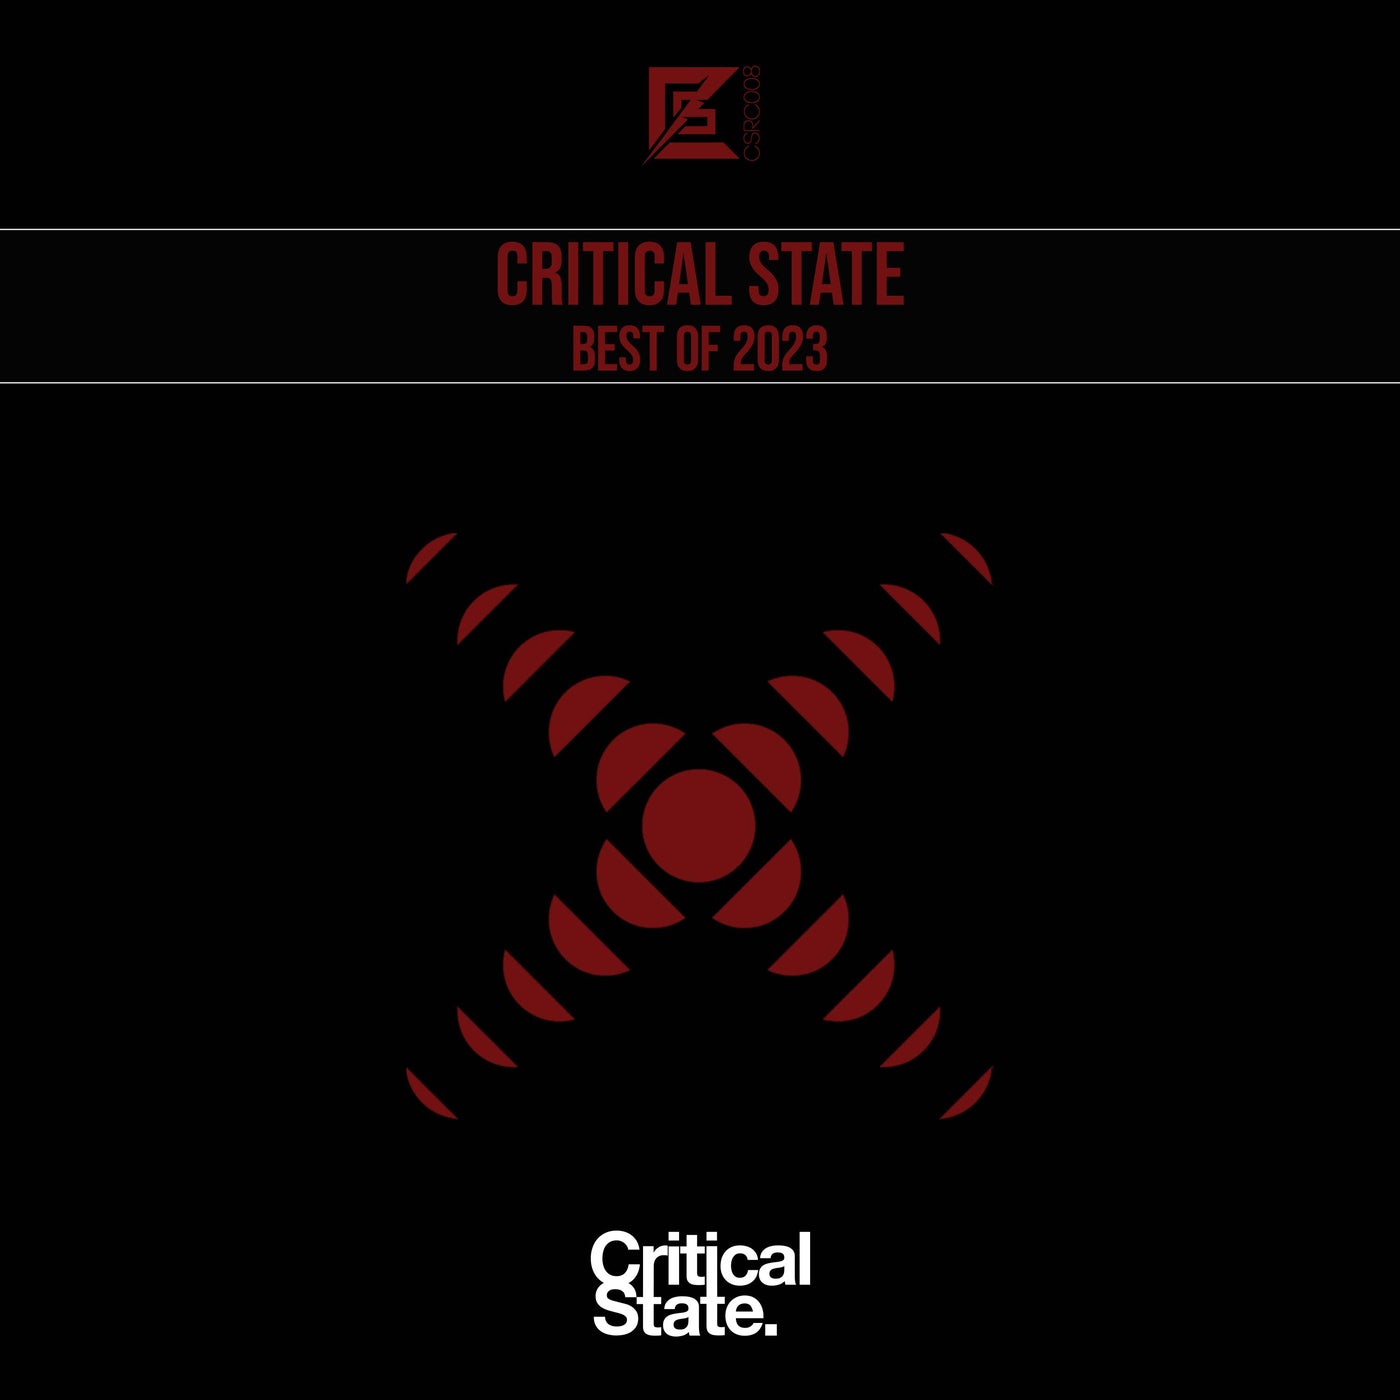 Critical State Best Of 2023